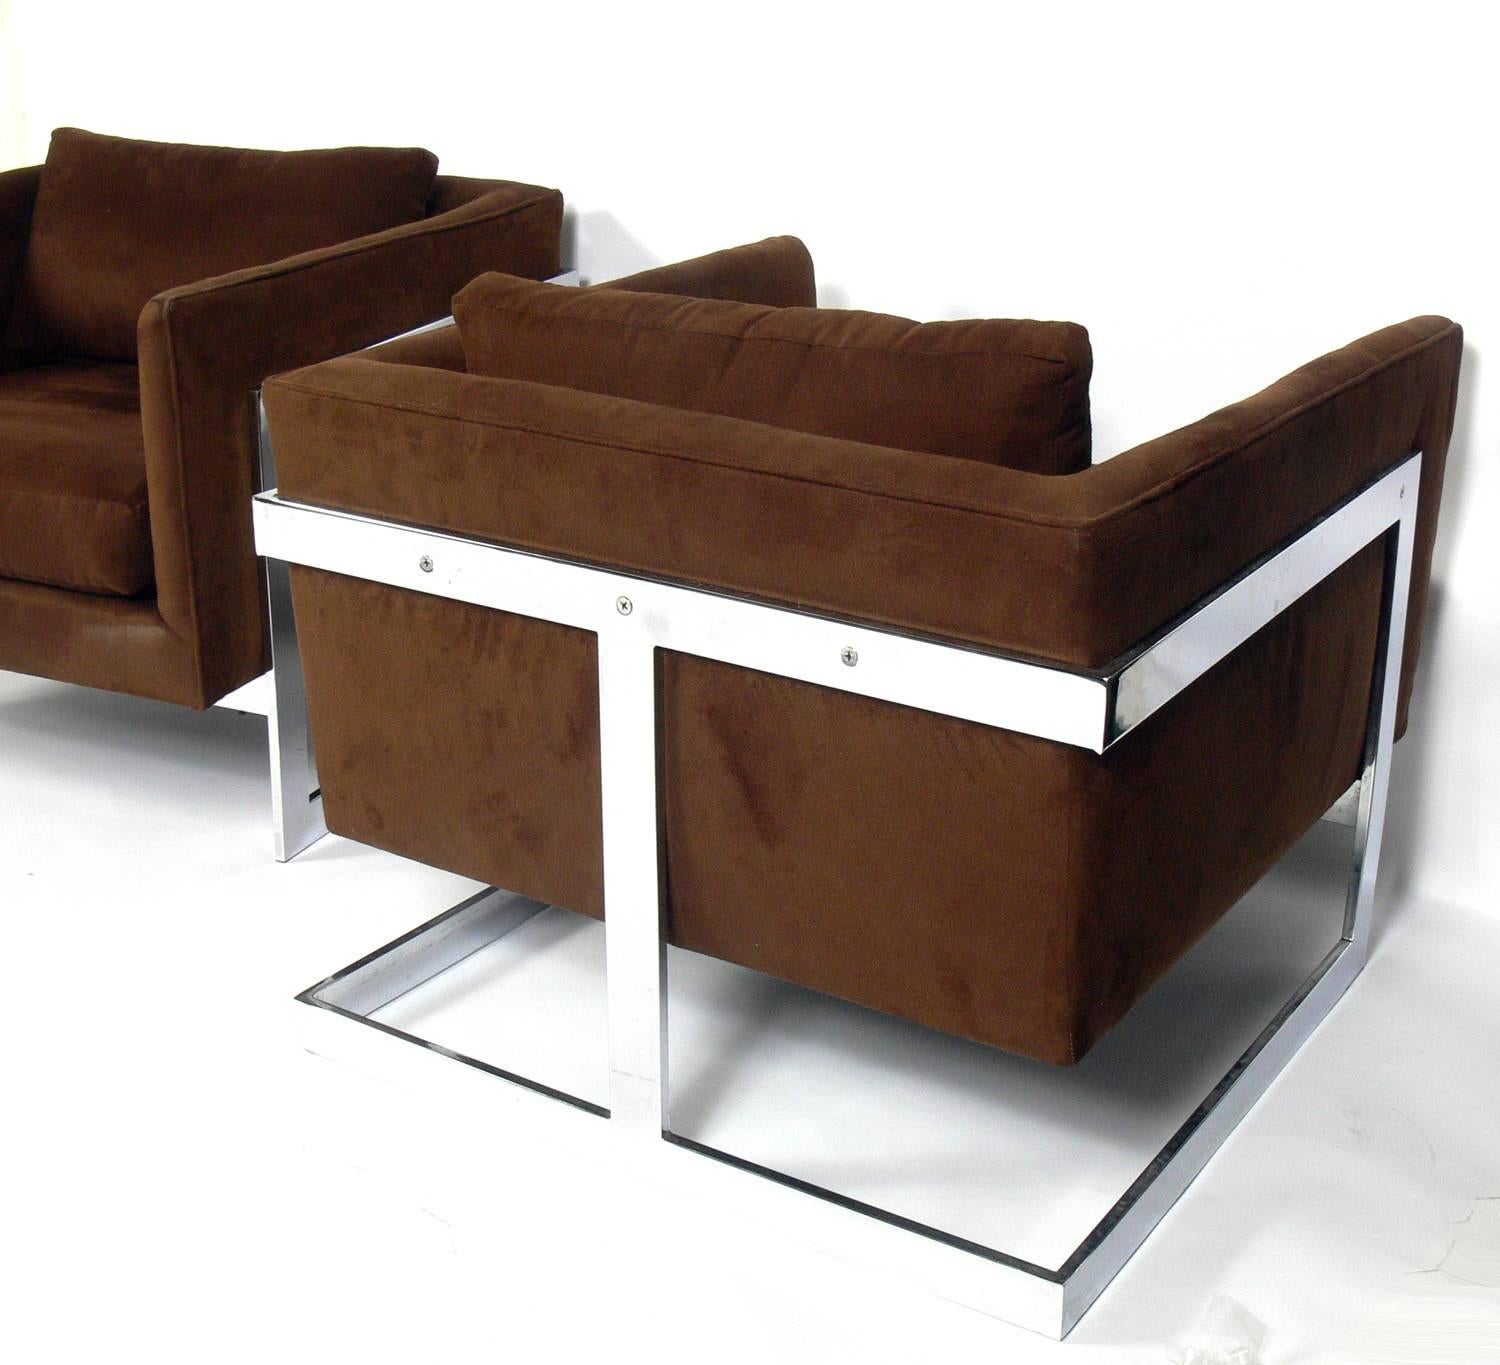 Pair of chrome cube lounge chairs, designed by Milo Baughman for Thayer Coggin, American, circa 1970s. They retain their second generation brown ultra suede type fabric. They are good to use as is with minor wear, or we can reupholster them in your